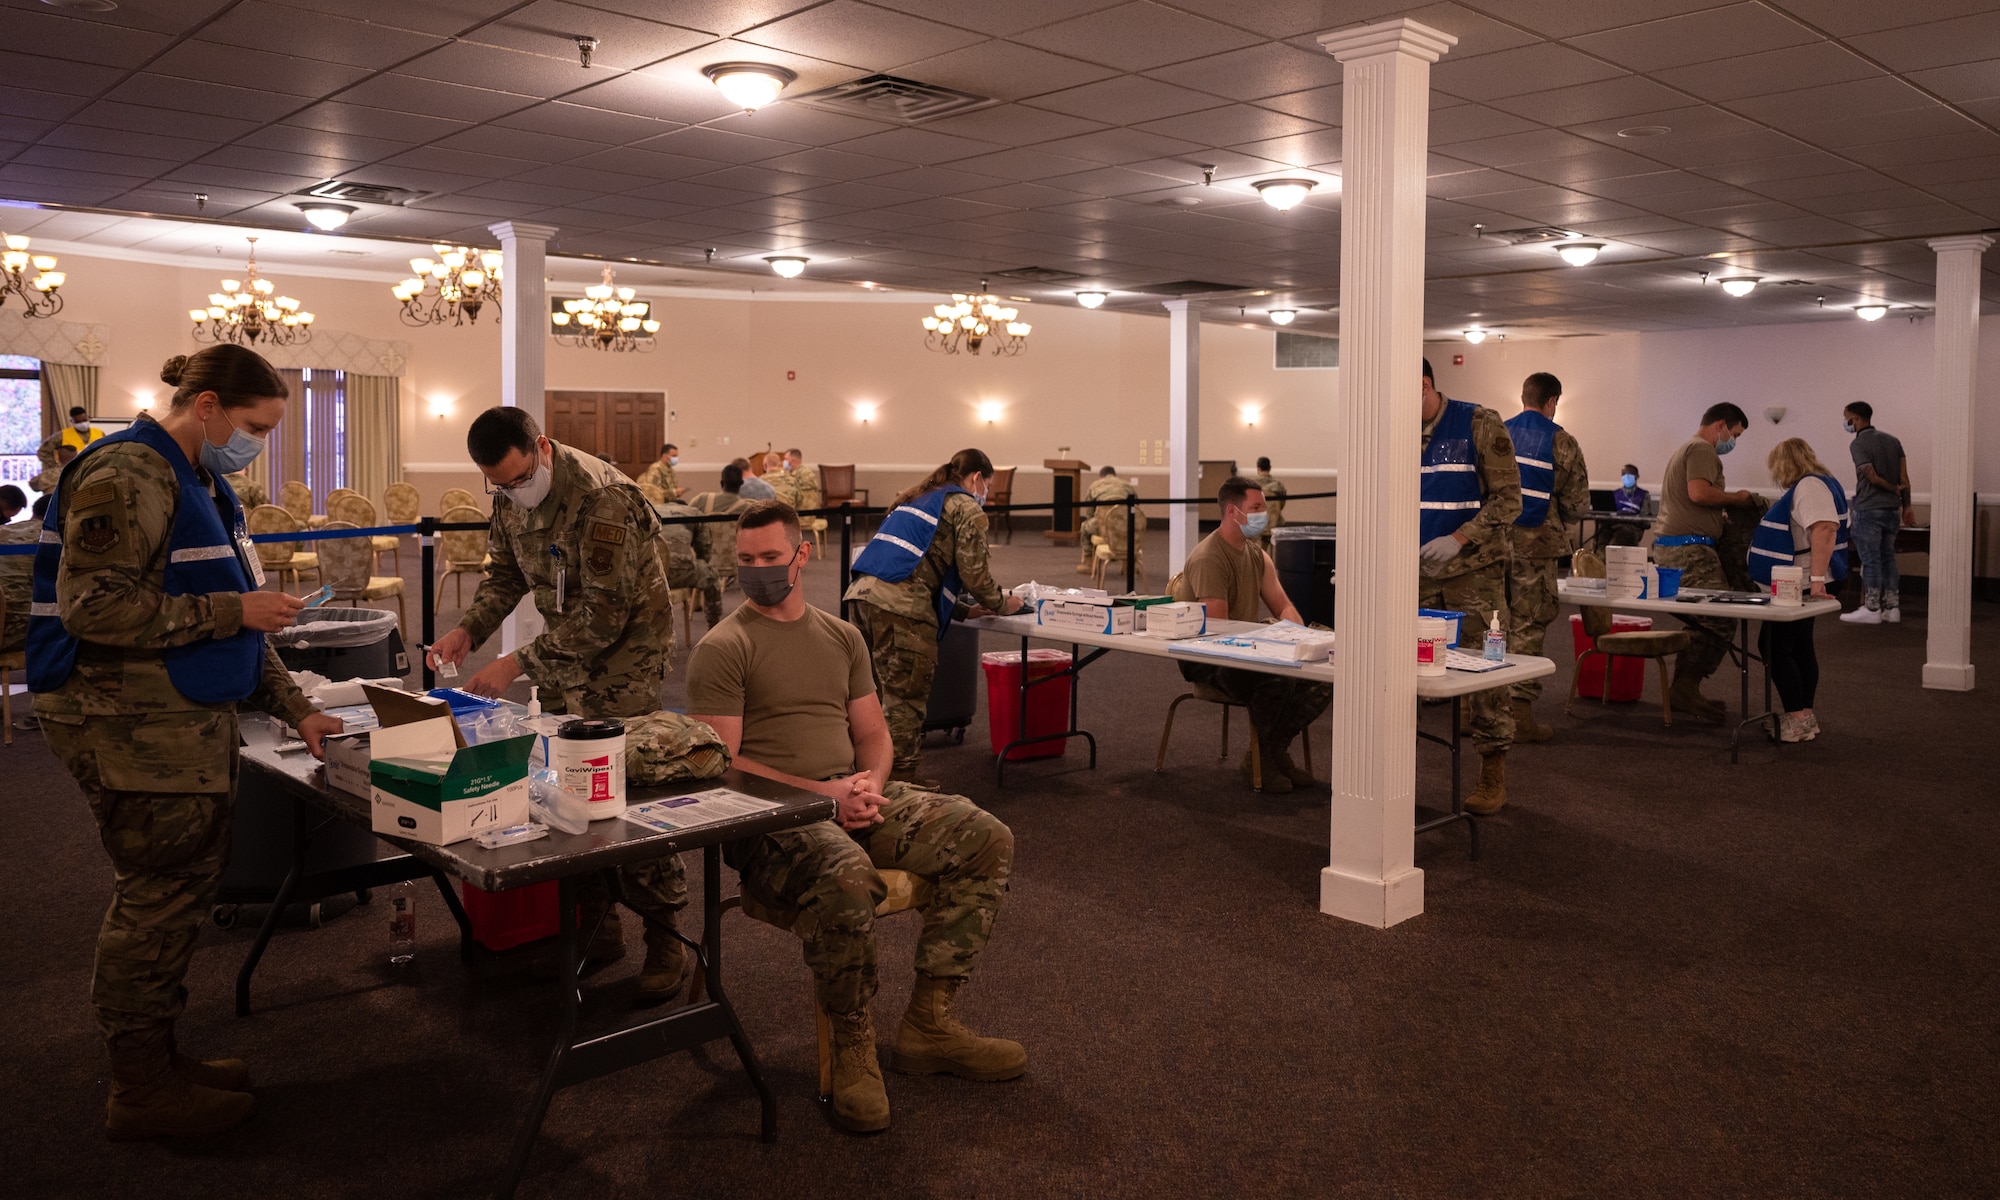 Vaccination of Airmen and Guardians enhances force health protection and readiness. This action is consistent with DoD mandatory vaccination programs for service members to address other health threats such as seasonal influenza.